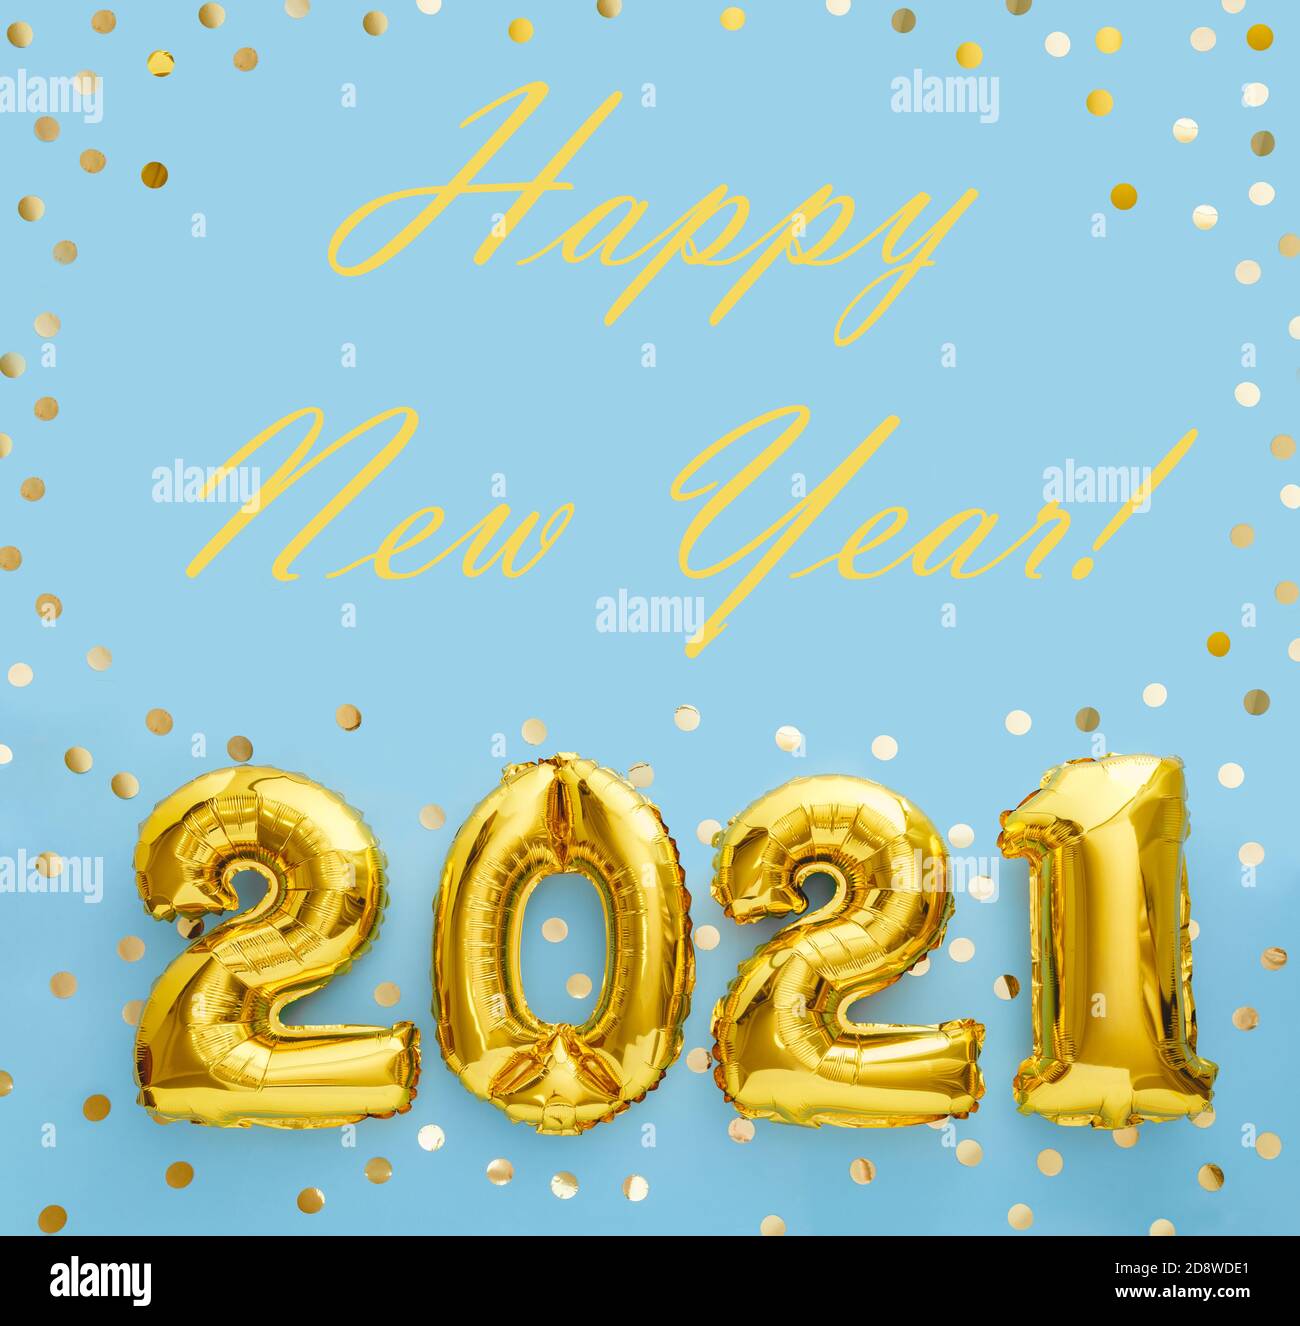 Happy New year text with gold foil balloons 2021 on blue background with confetti. New Year eve invitation 2021. Square flat lay Stock Photo